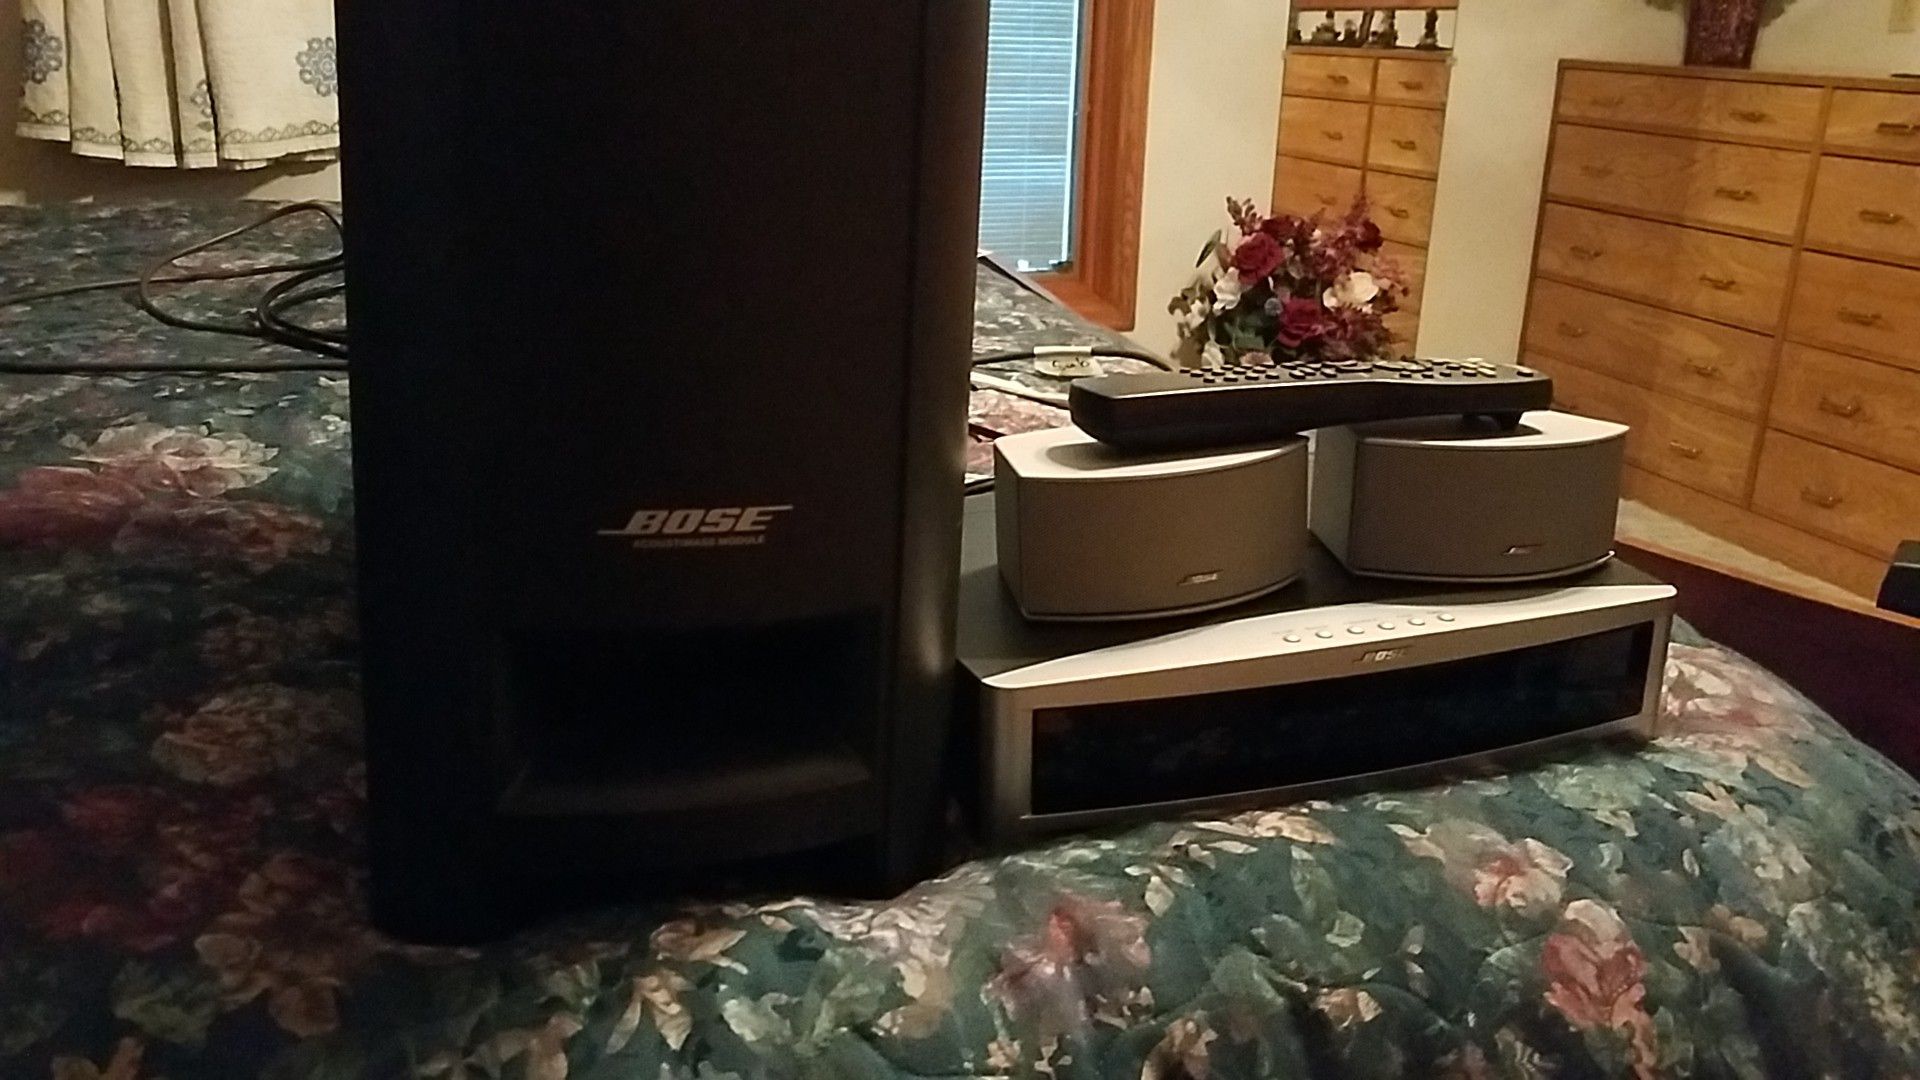 Bose acqustimass module system with nice speakers and a receiver